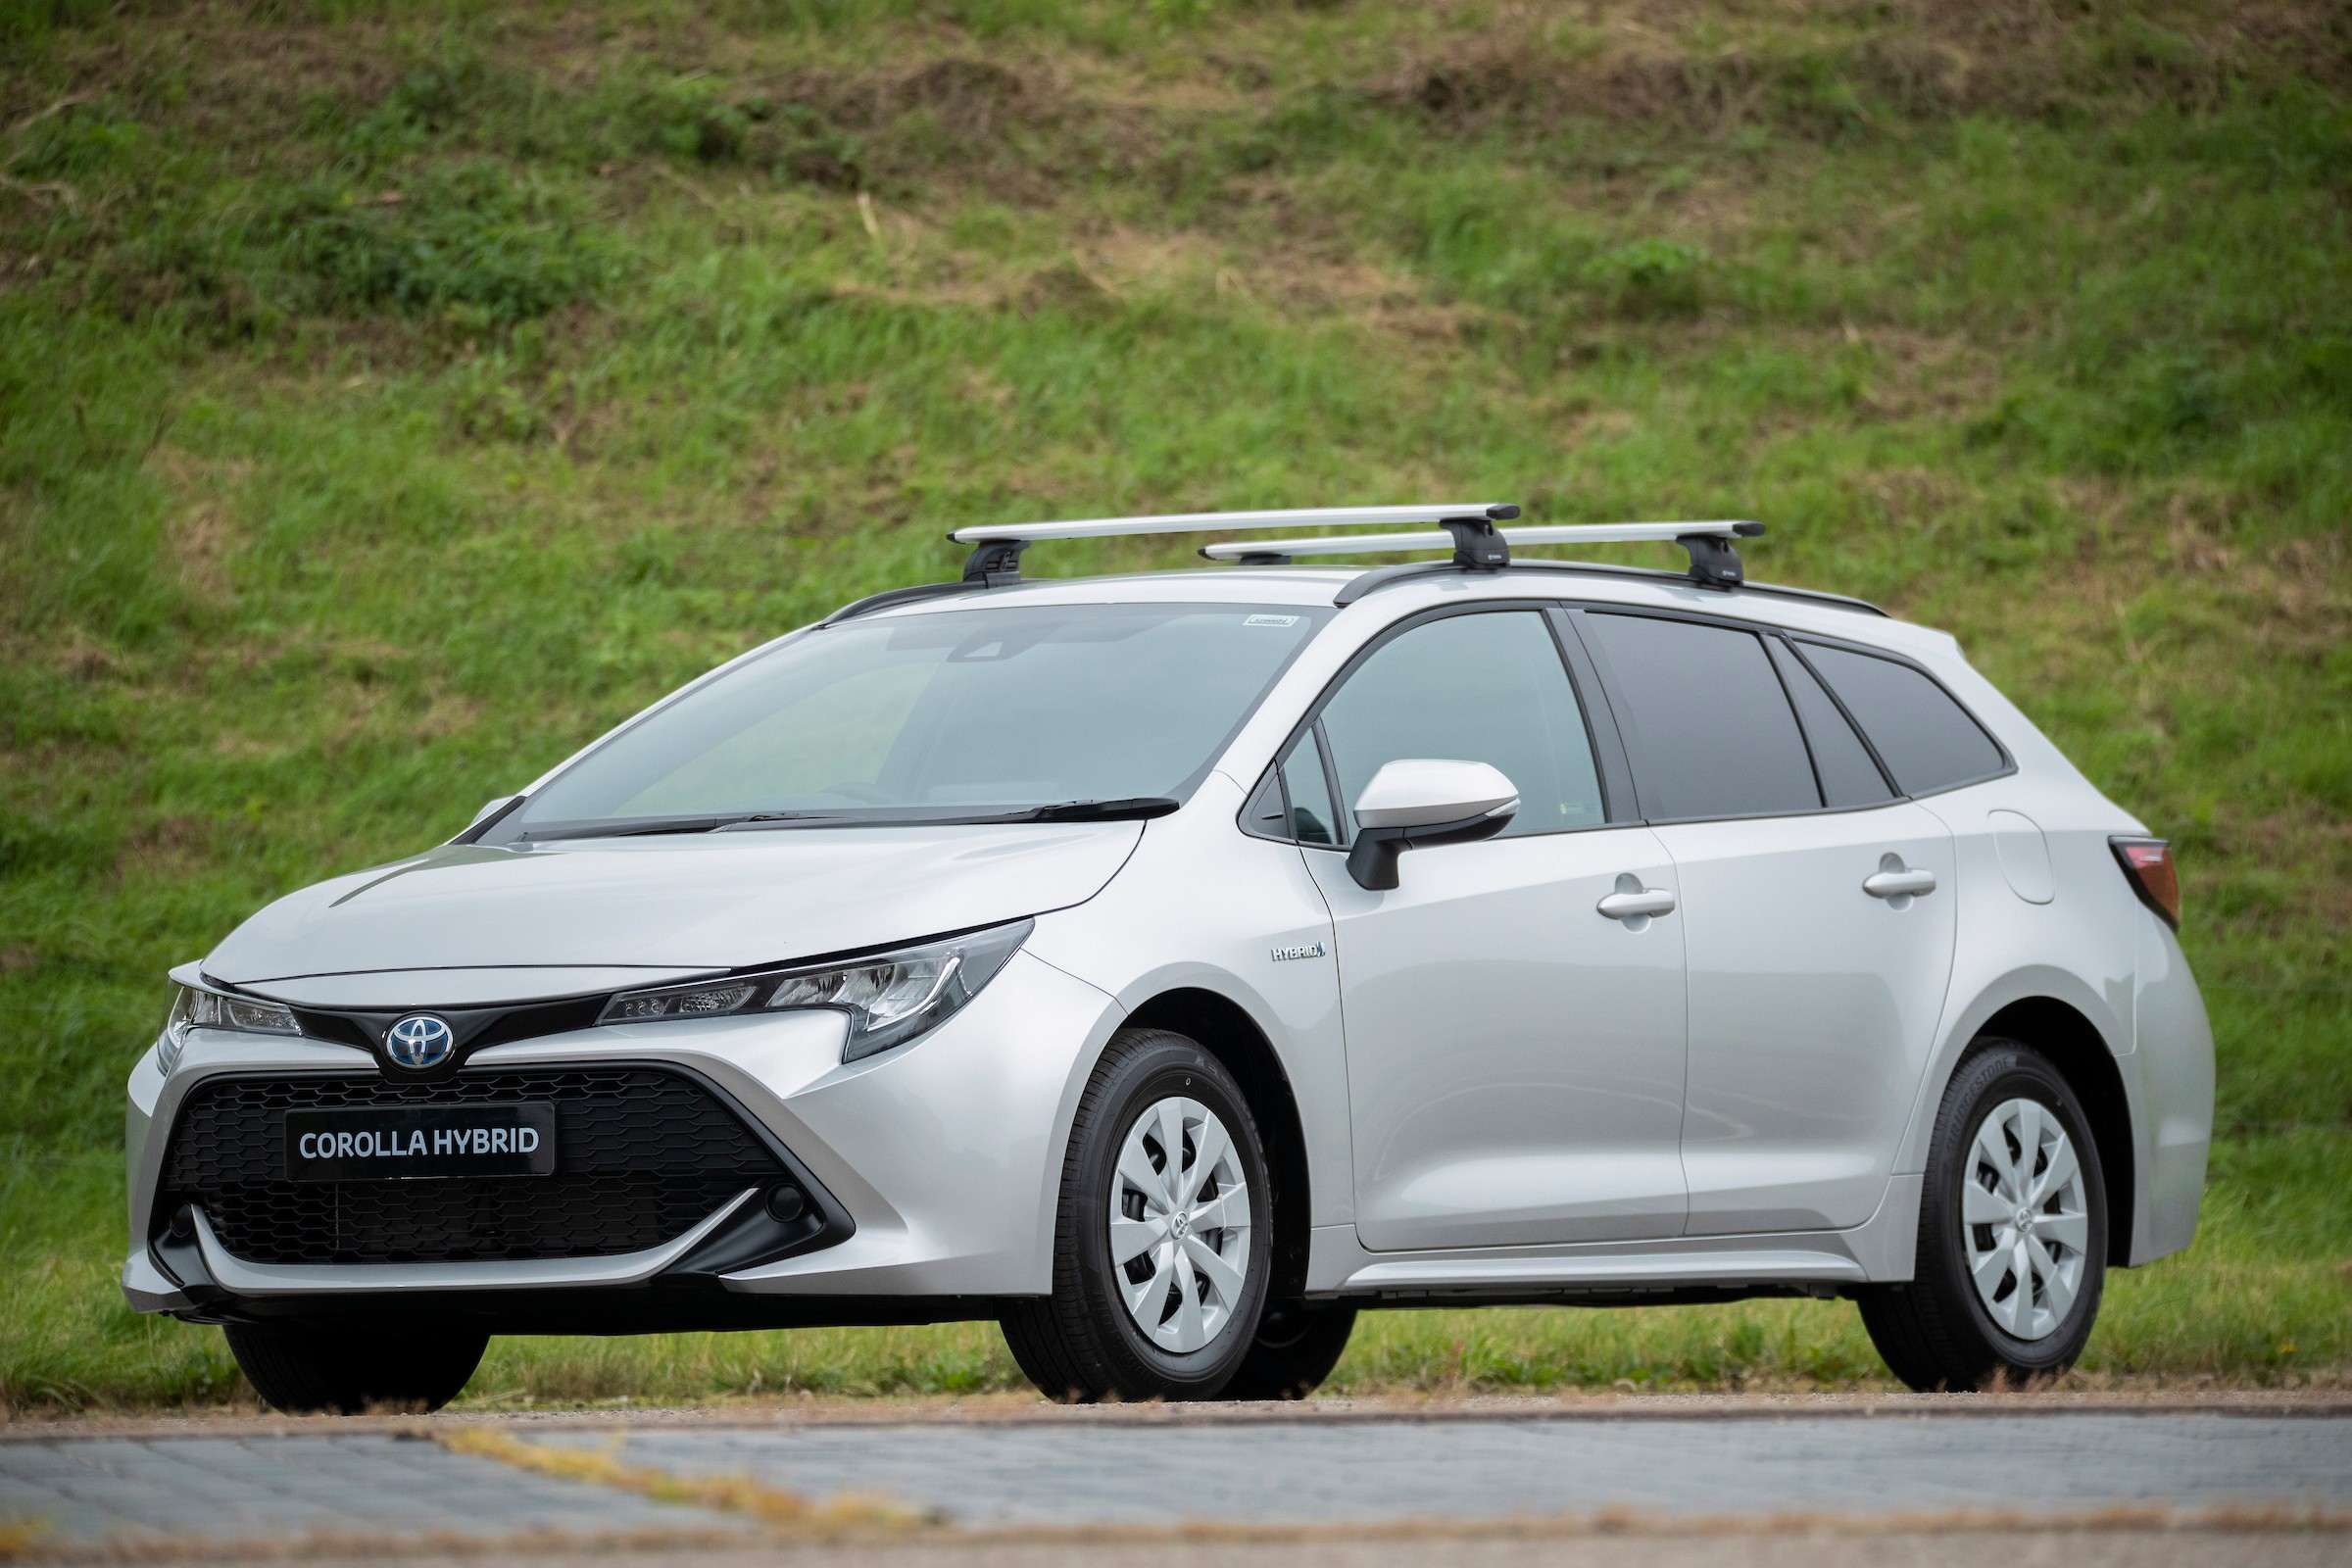 https://s1.cdn.autoevolution.com/images/news/gallery/toyota-turns-the-corolla-touring-sports-into-a-commercial-van-gives-it-hybrid-power_1.jpg